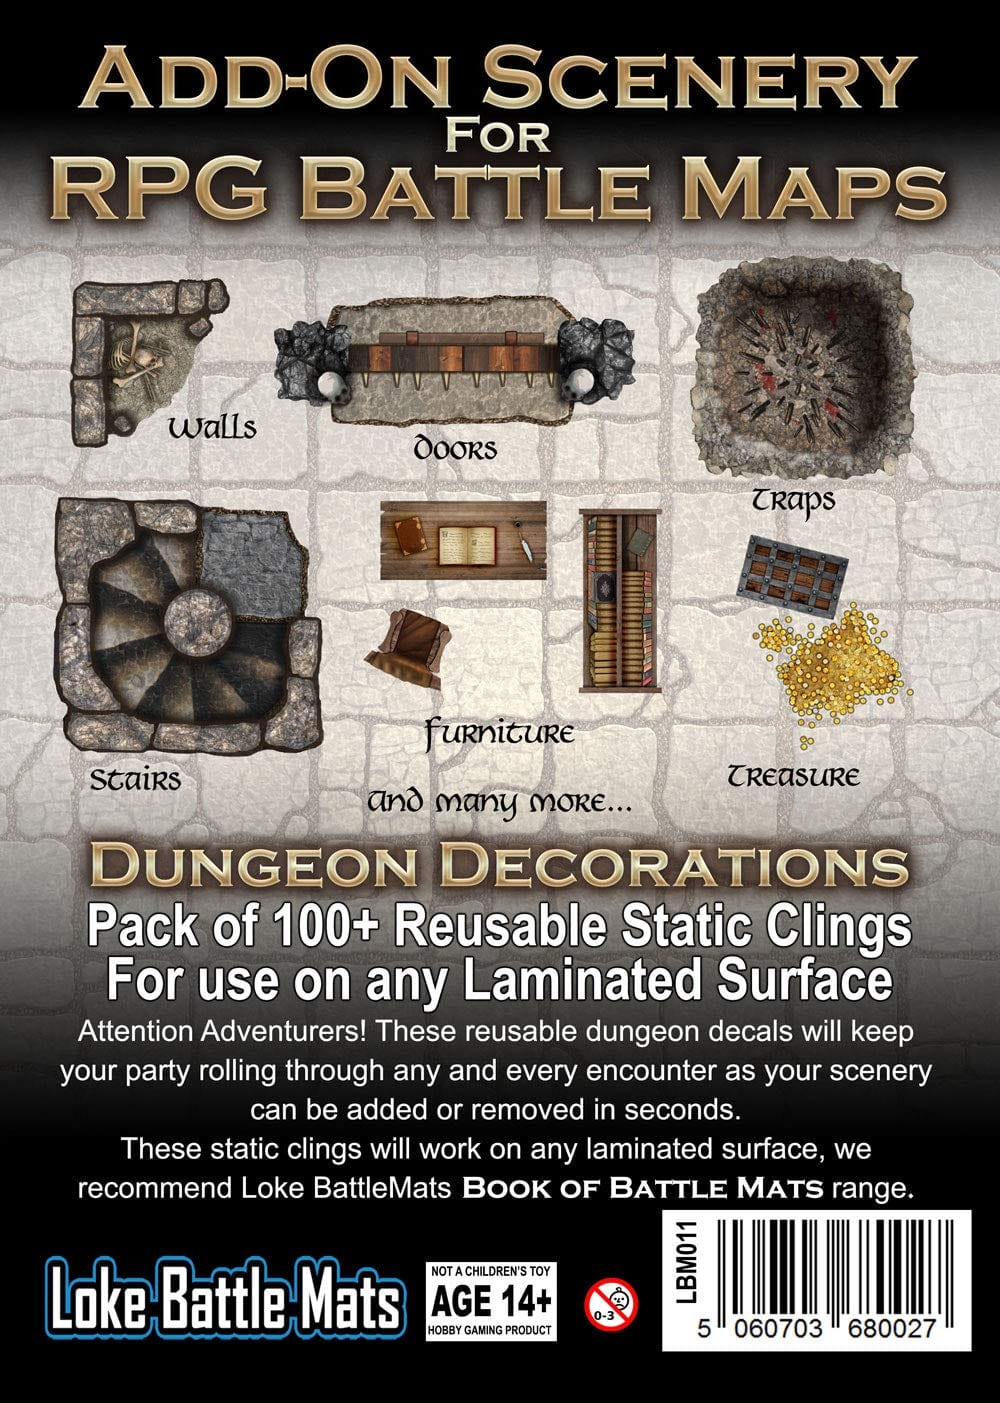 Battle Mats: Add - On Scenery for RPG Battle Maps - Dungeon Decorations - Lost City Toys